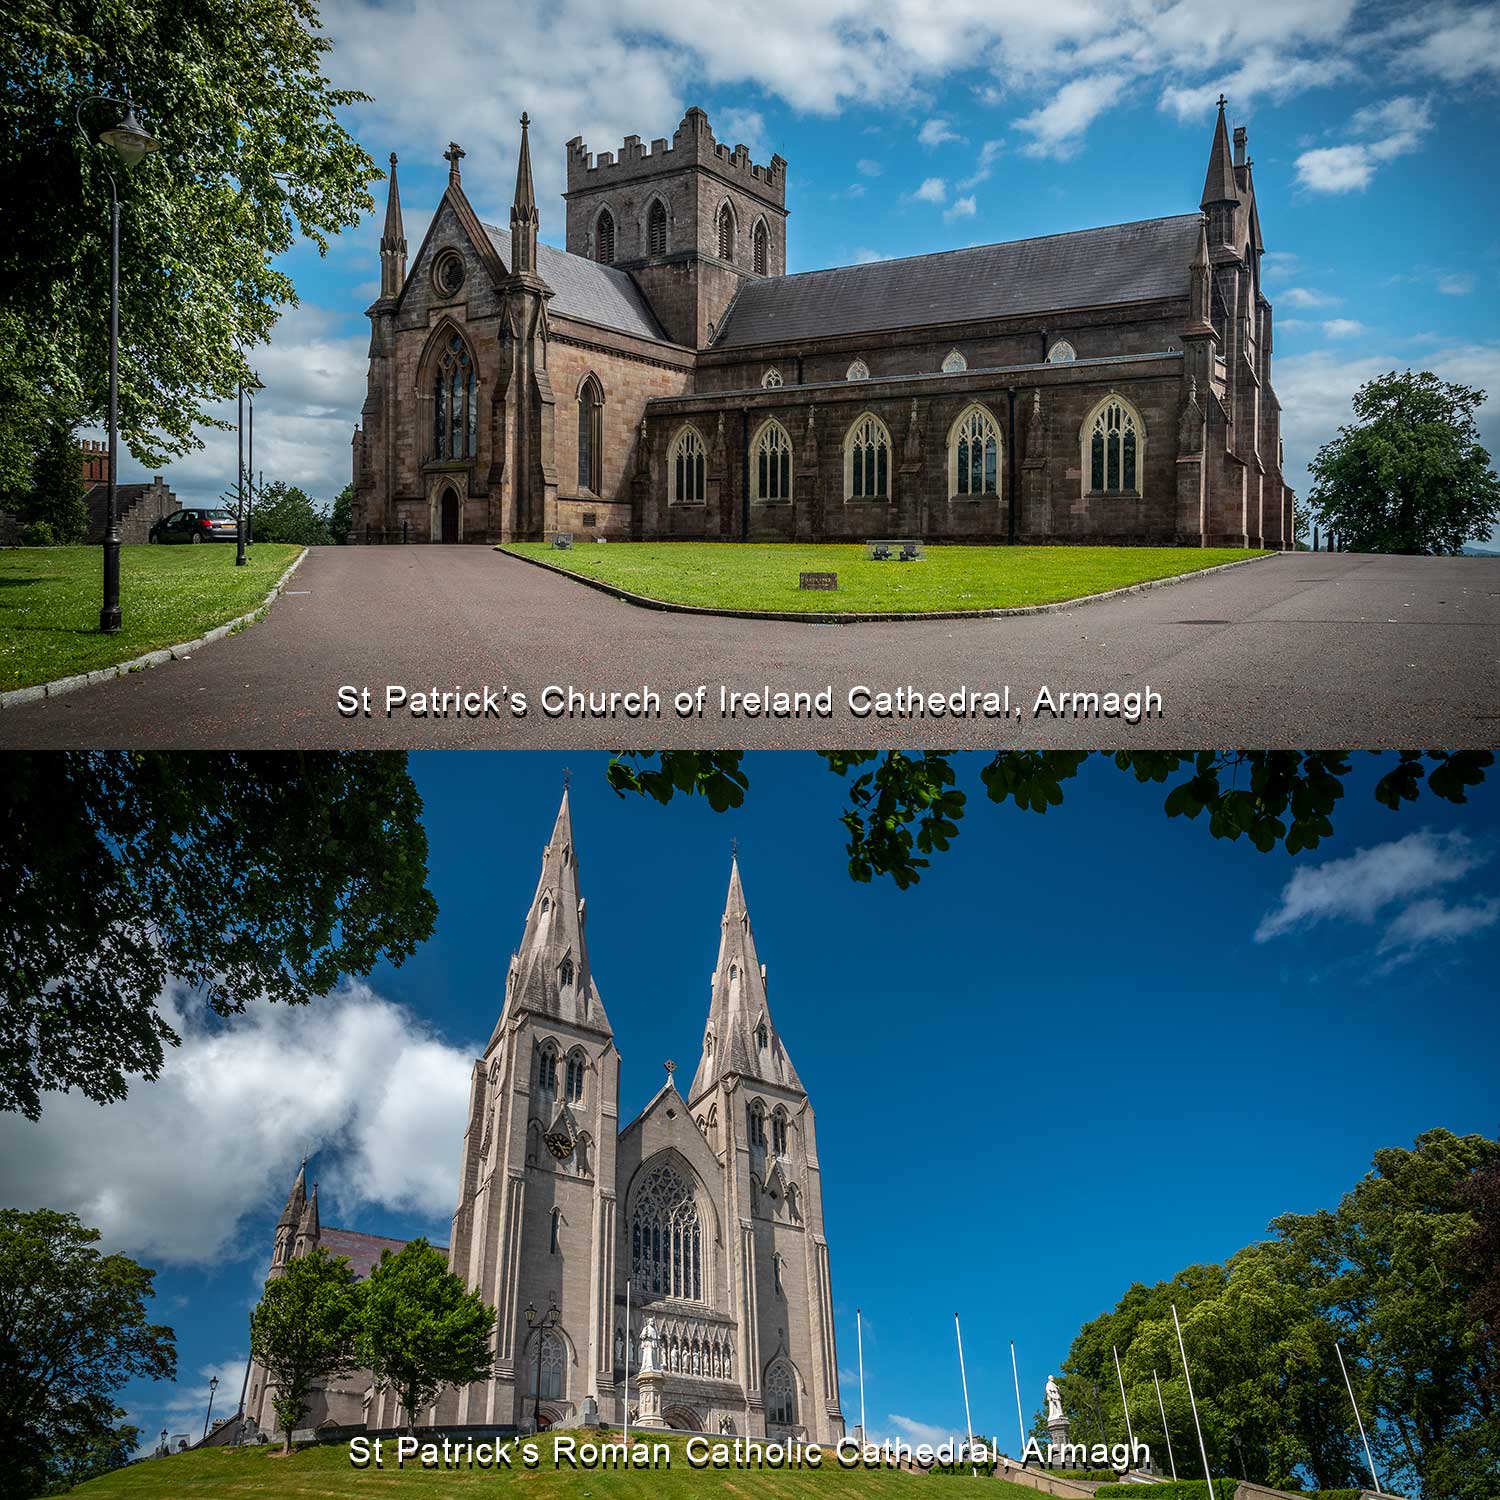 Armagh's two Cathedrals, named after St Patrick, are just a short distance apart.